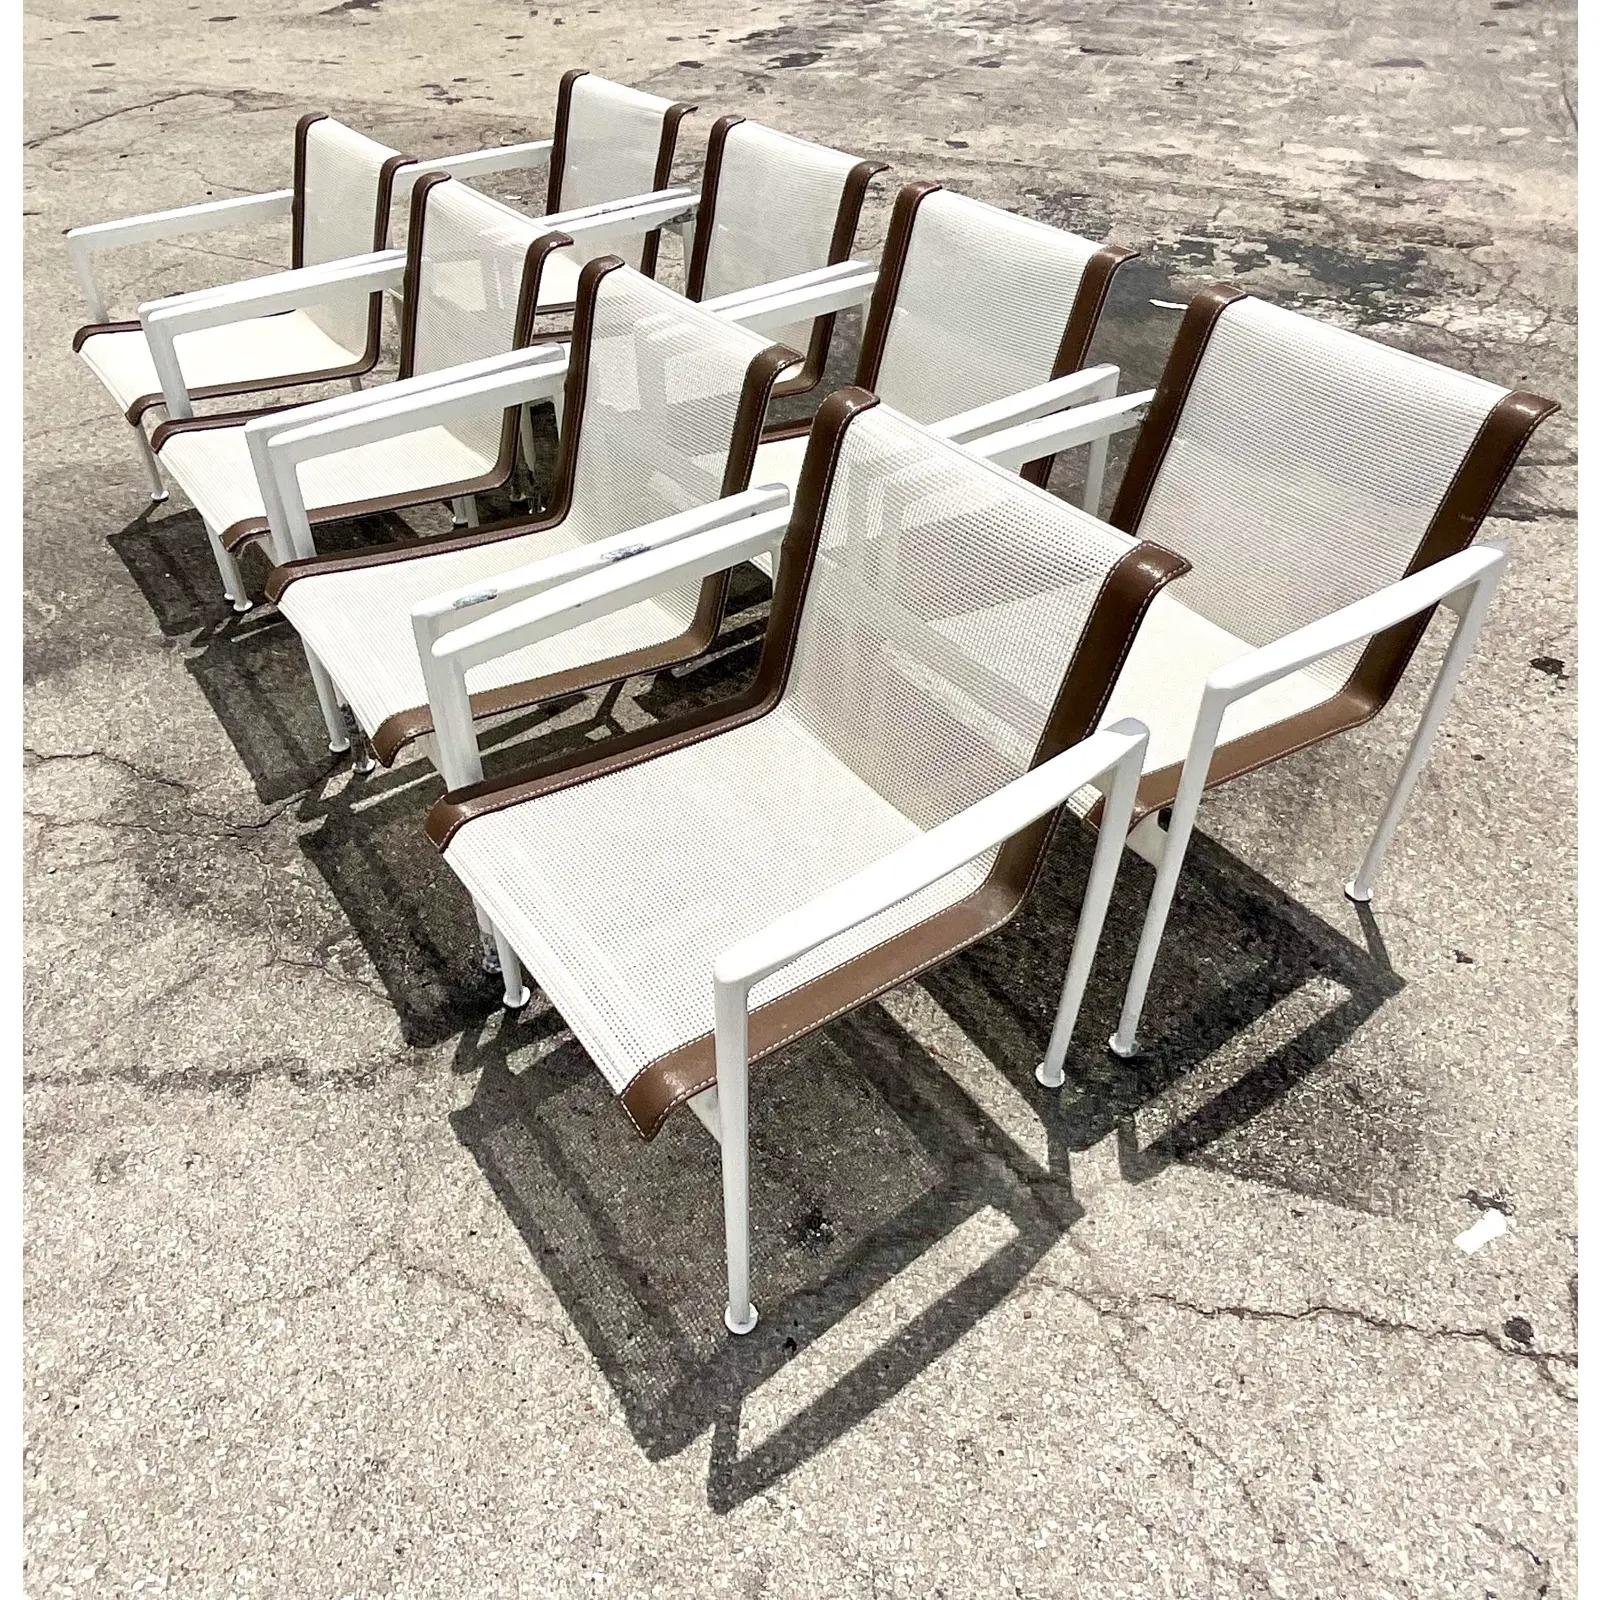 A fantastic set of 8 vintage outdoor dining chairs. Made by the iconic Richard Schultz and tagged on the bottom. White mesh seats with brown end straps. Matching pieces also available. Acquired from a Palm Beach estate.